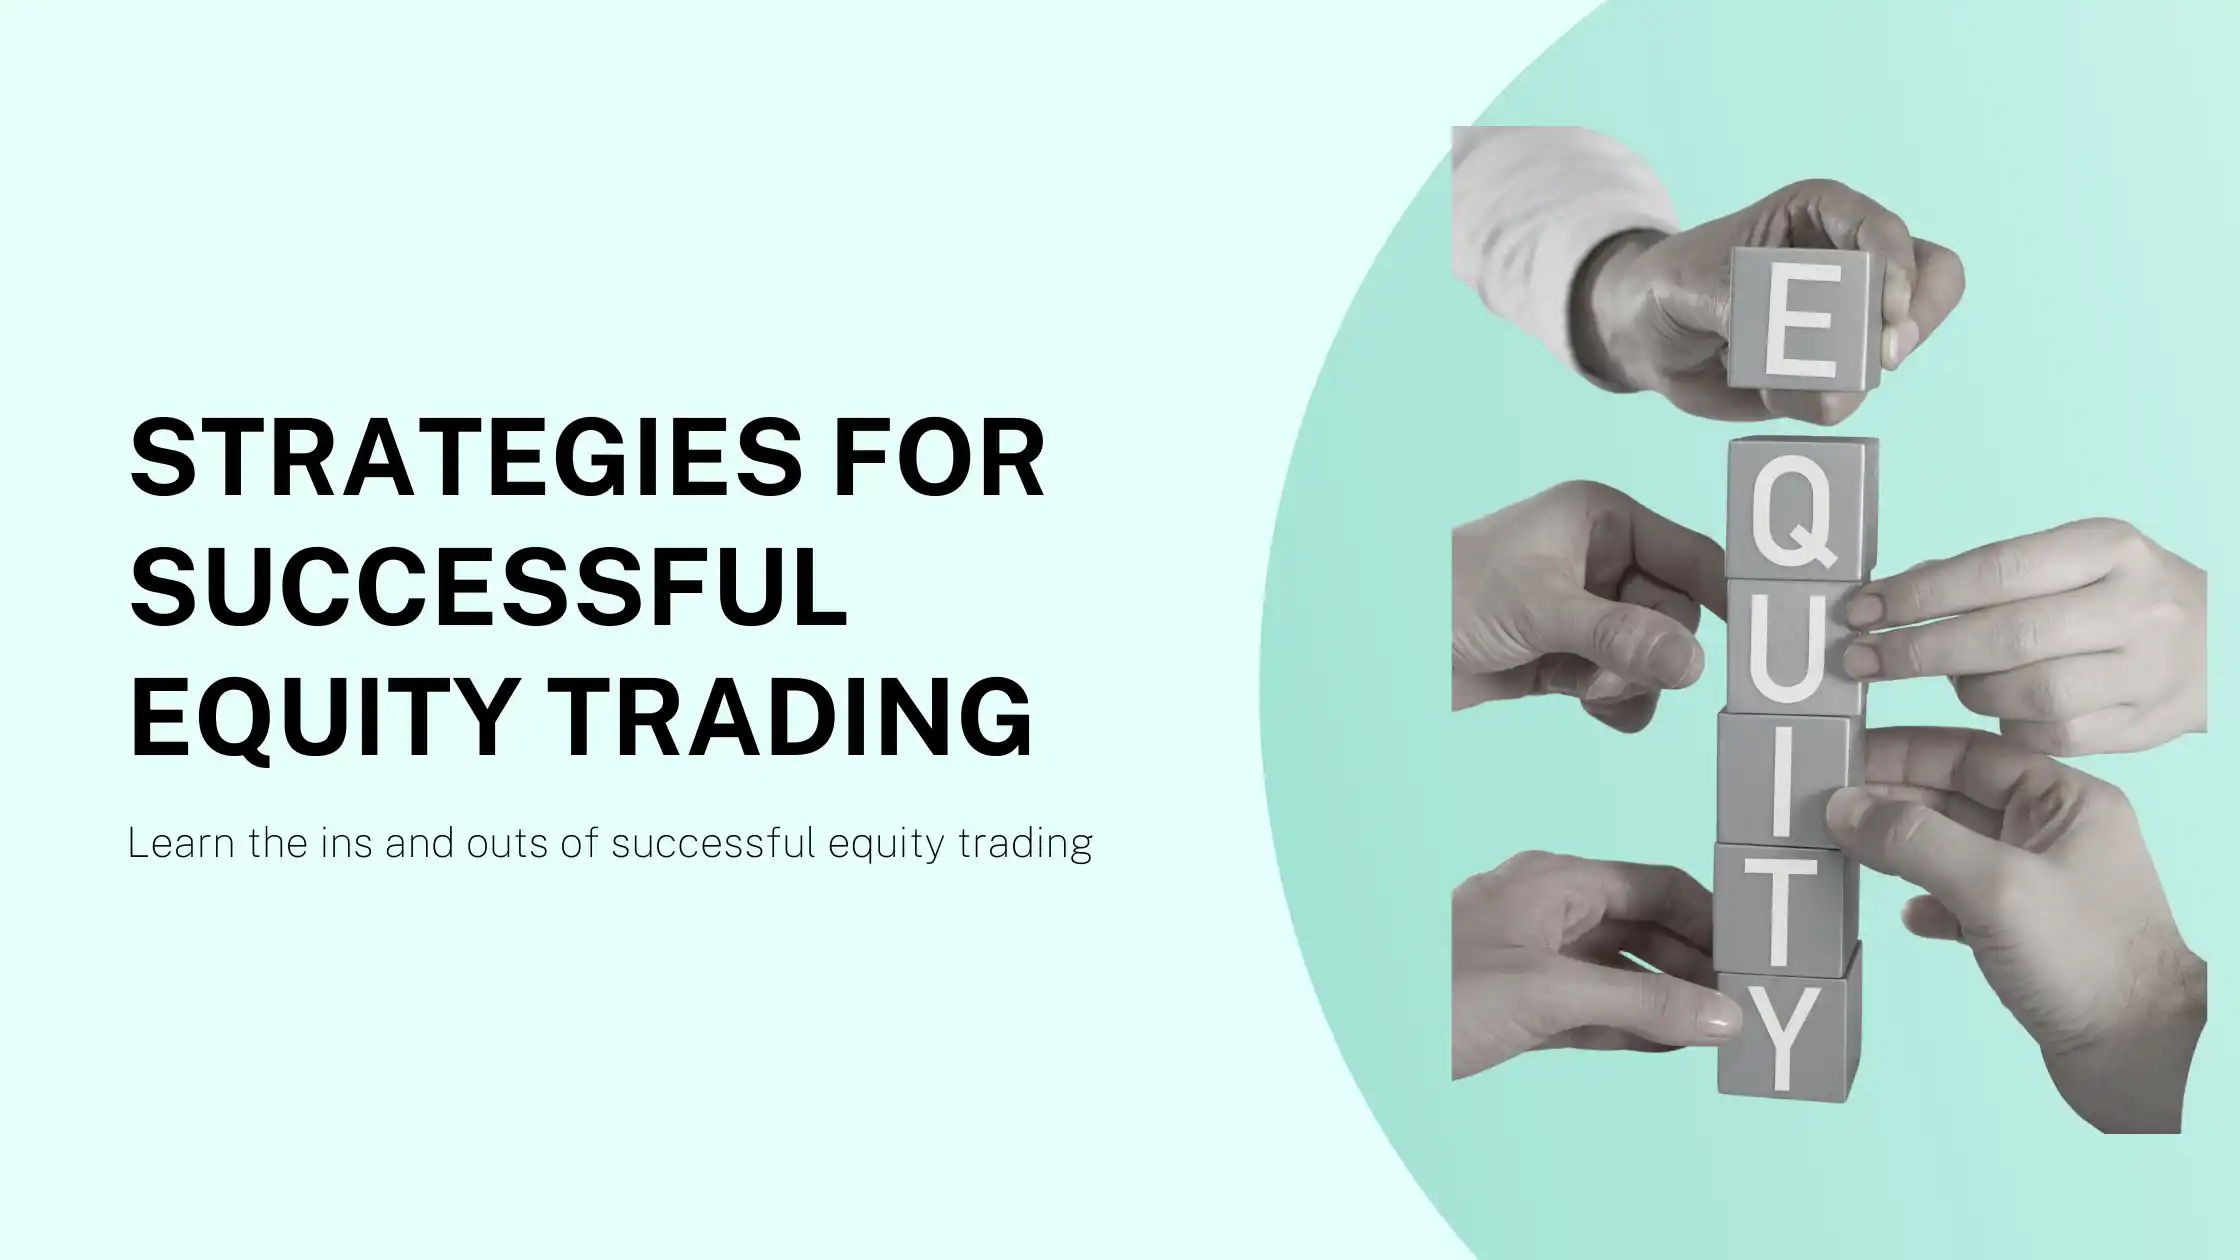 5 Proven Strategies for Successful Equity Trading